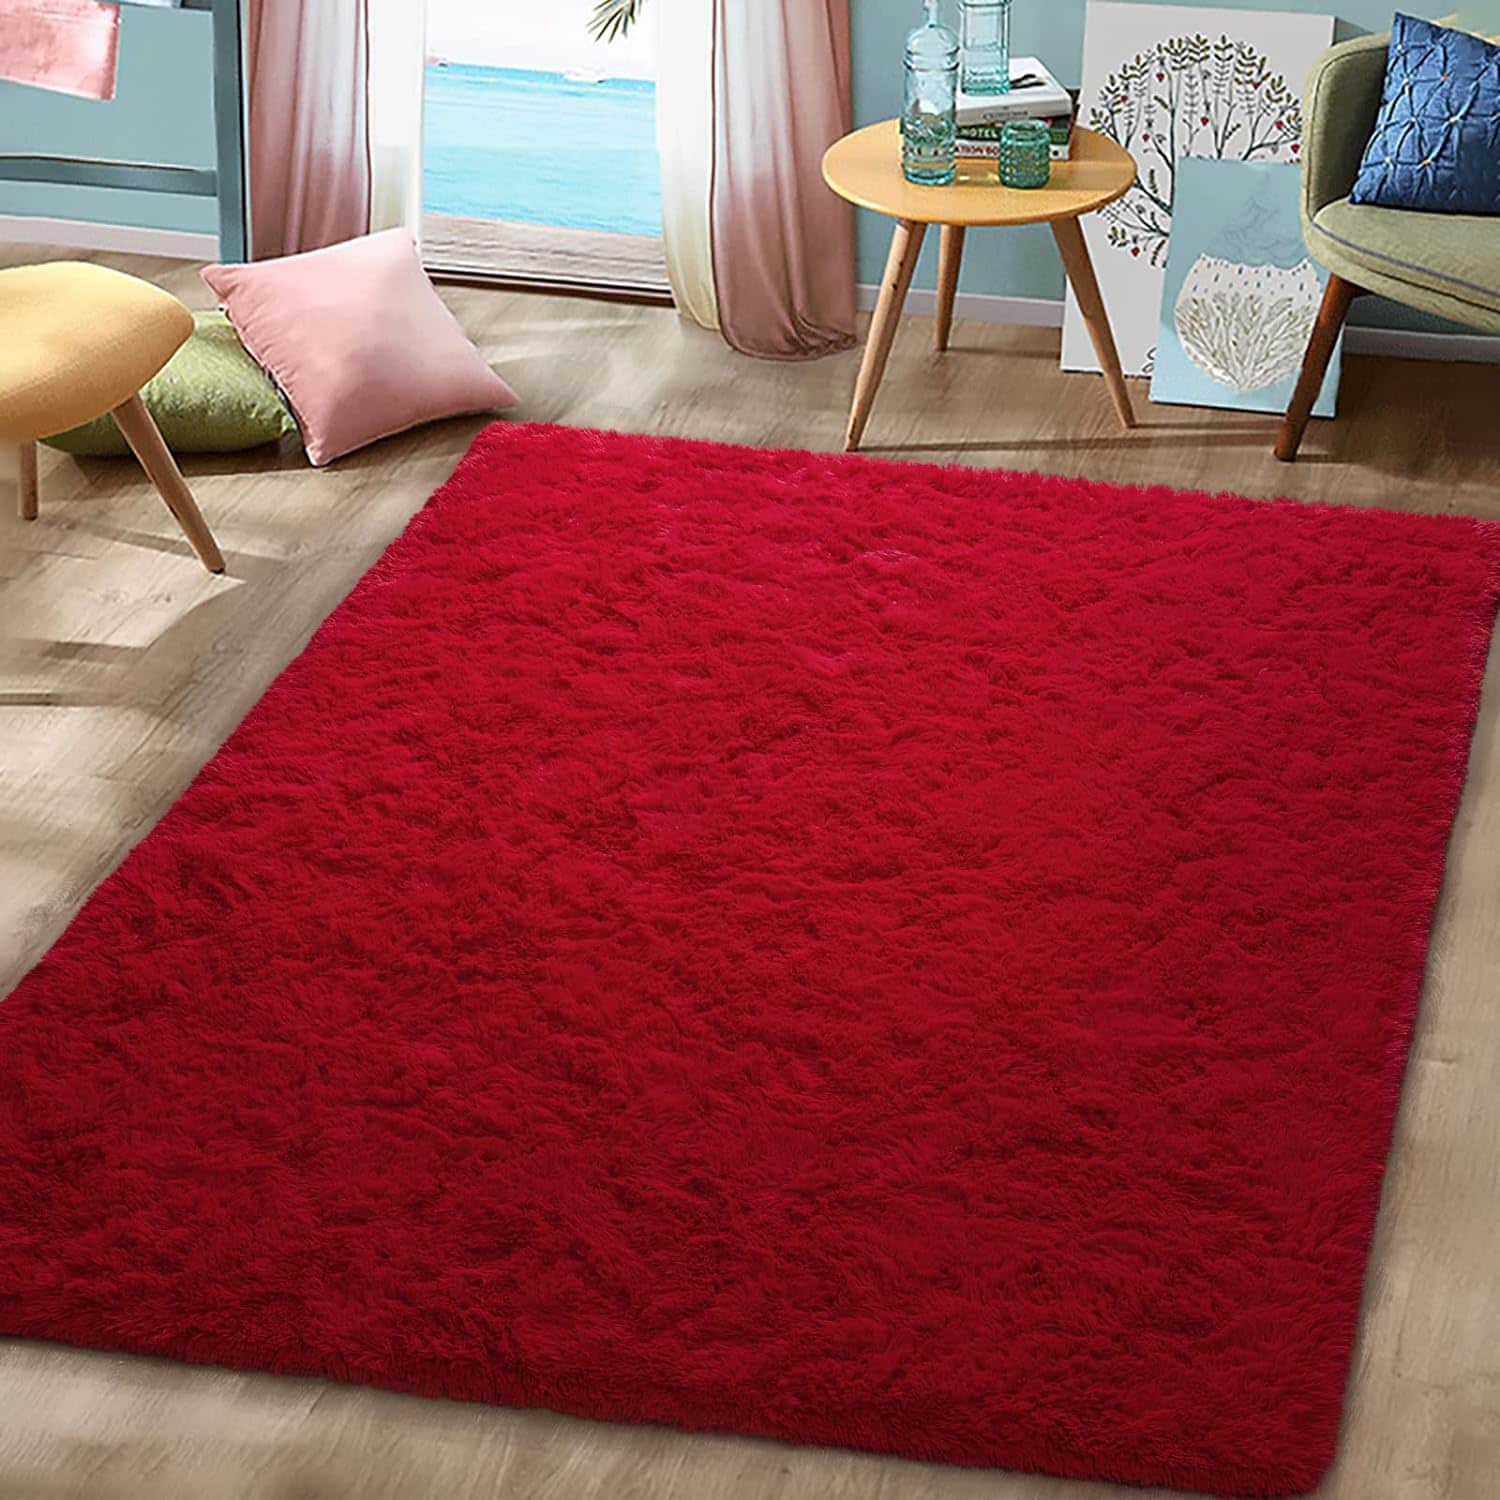 red rugs for living room